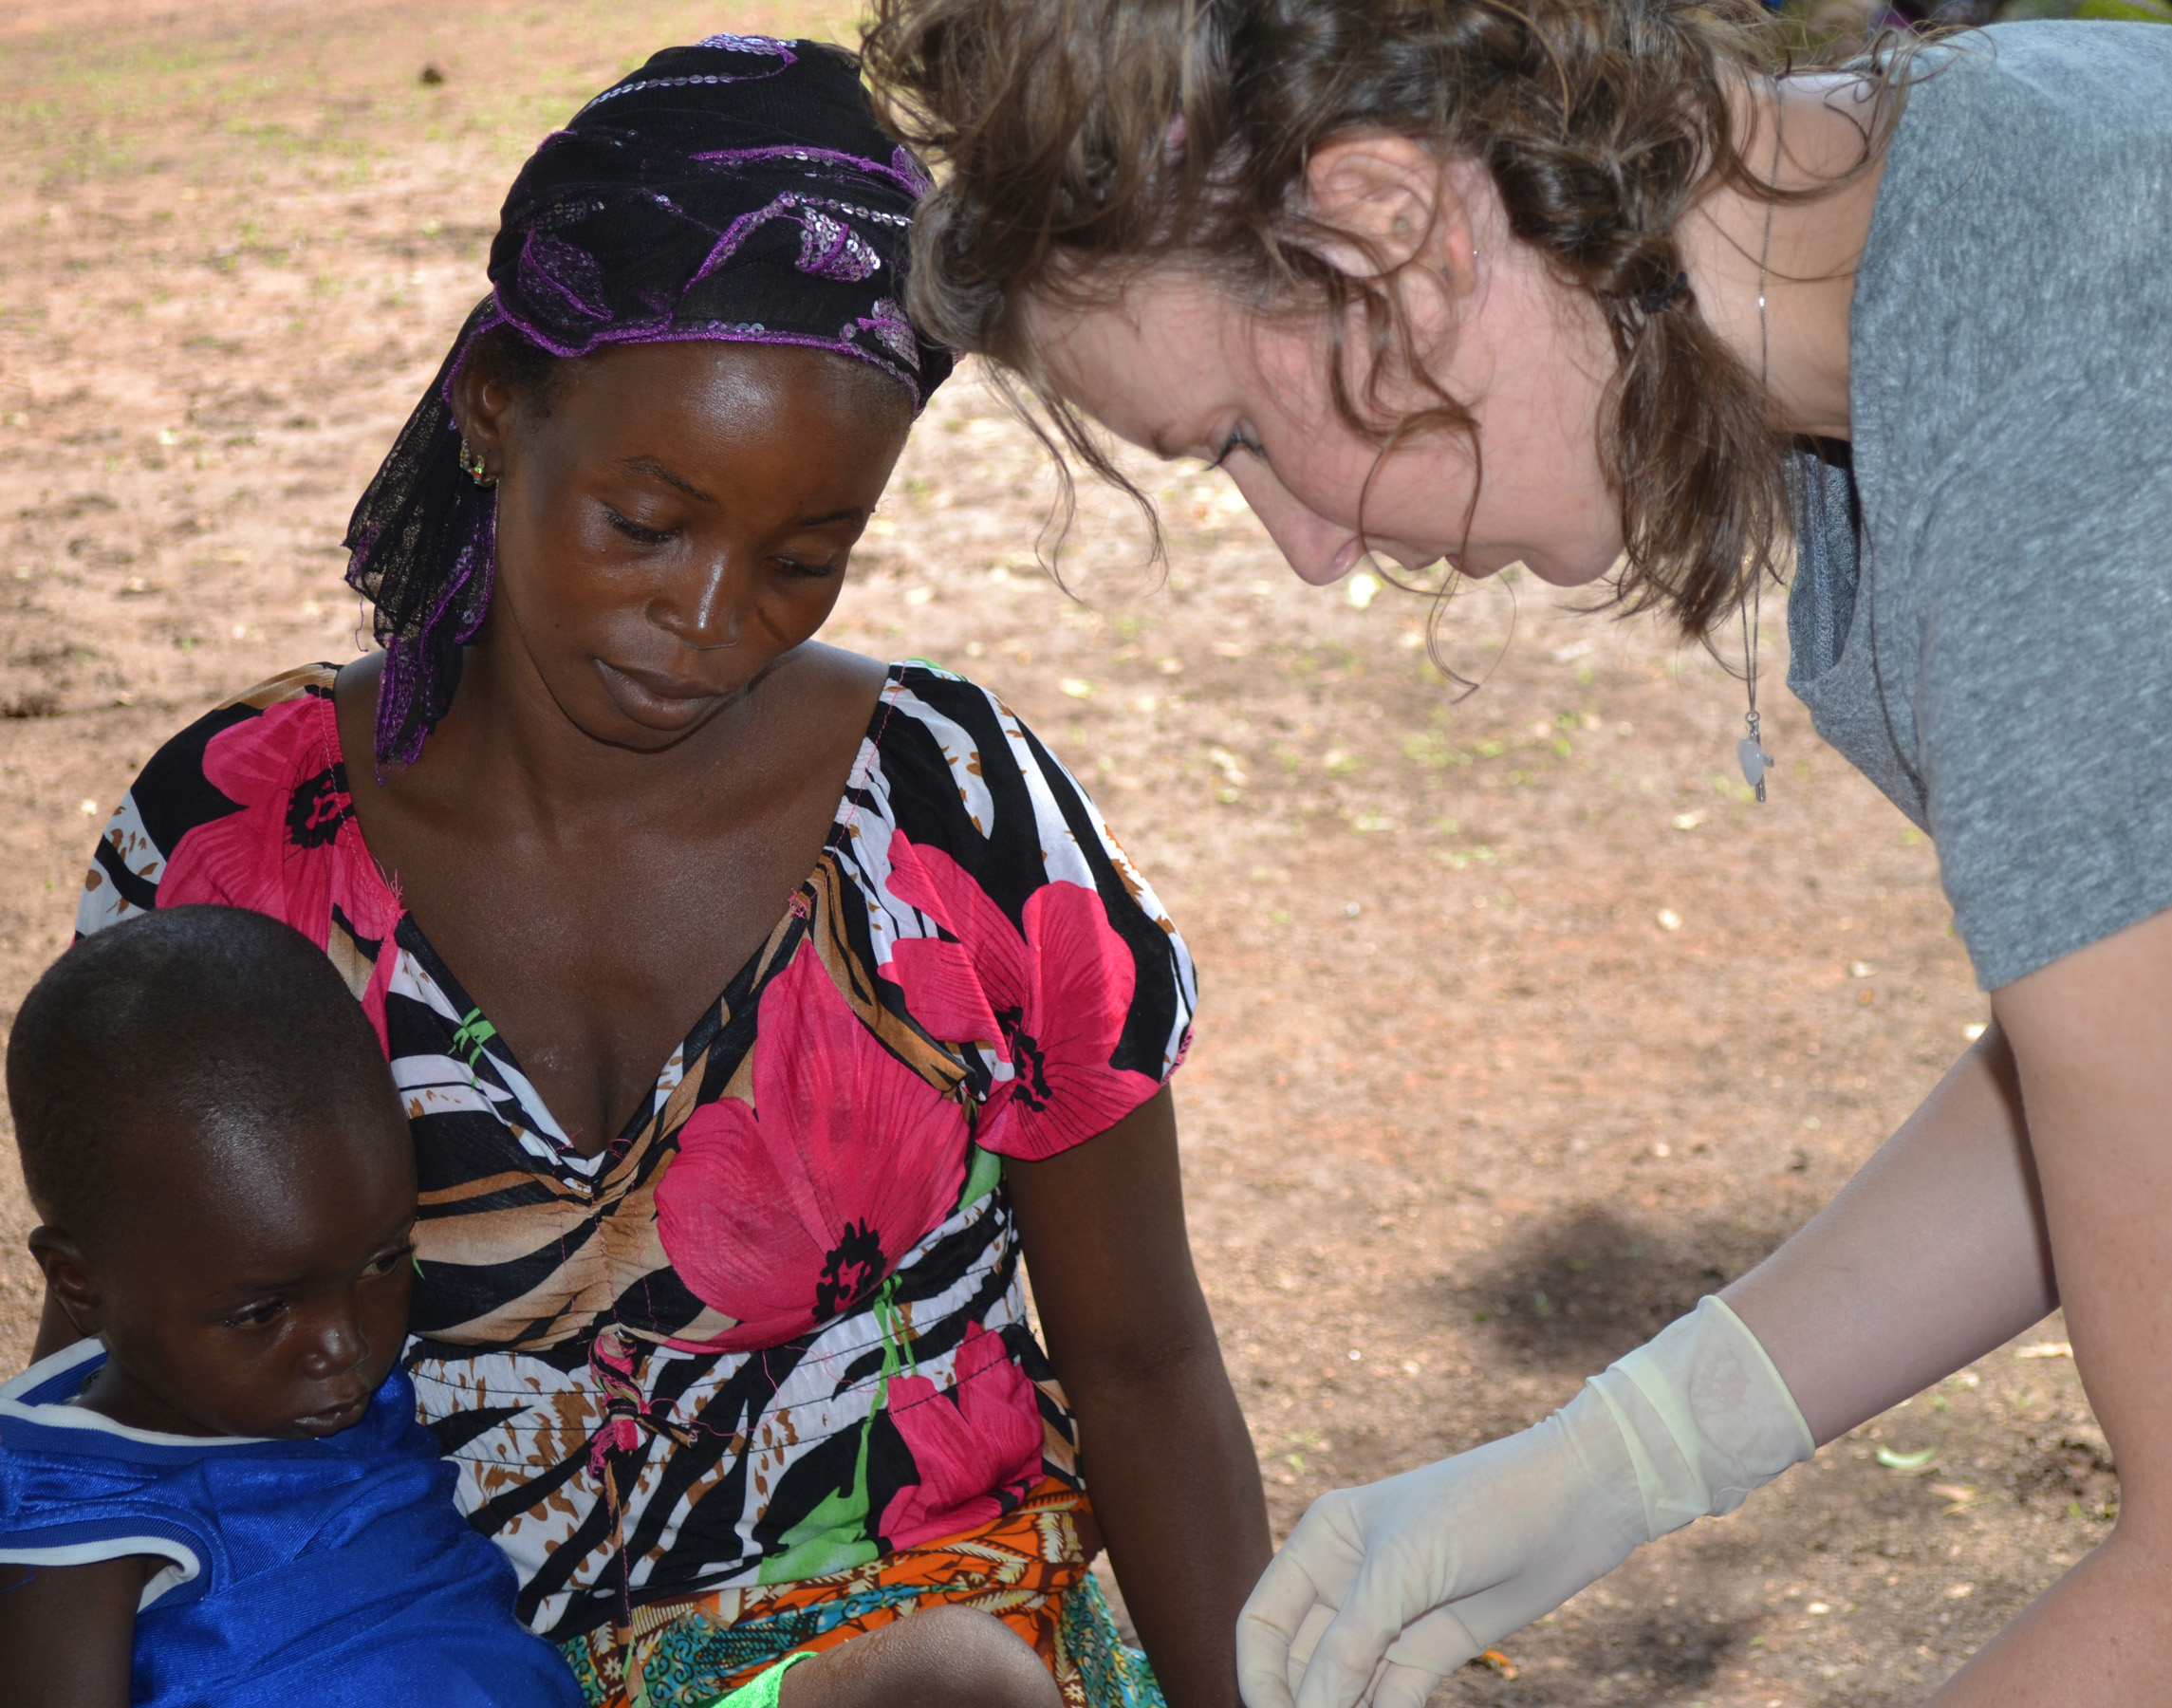 Lindsay Wiggers, another former intern, checks the health of a young child while the mother looks on.